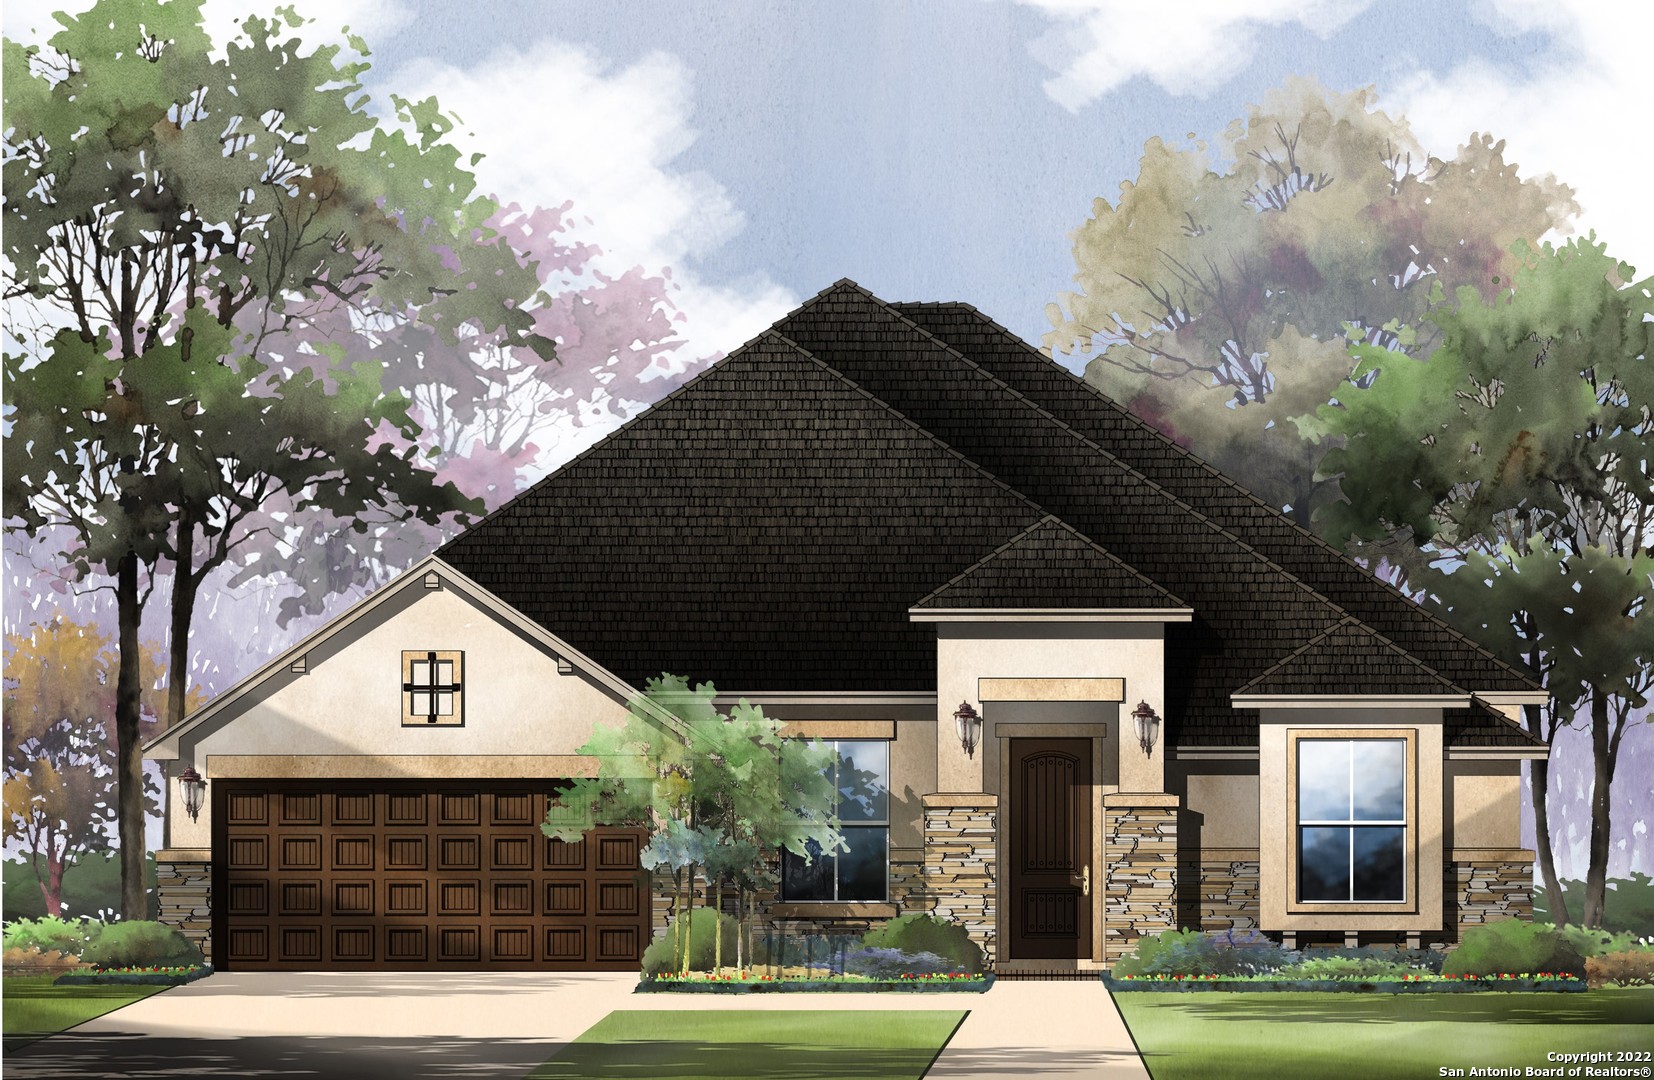 With almost $93,000 in upgrades, this home embodies the award winning, grand Monticello Homes' feel of elegance.  Wide entry with tall ceilings gives way to a very open-concept and spacious layout.  This versatile plan has rooms to fit every lifestyle.  *Move In Ready October*